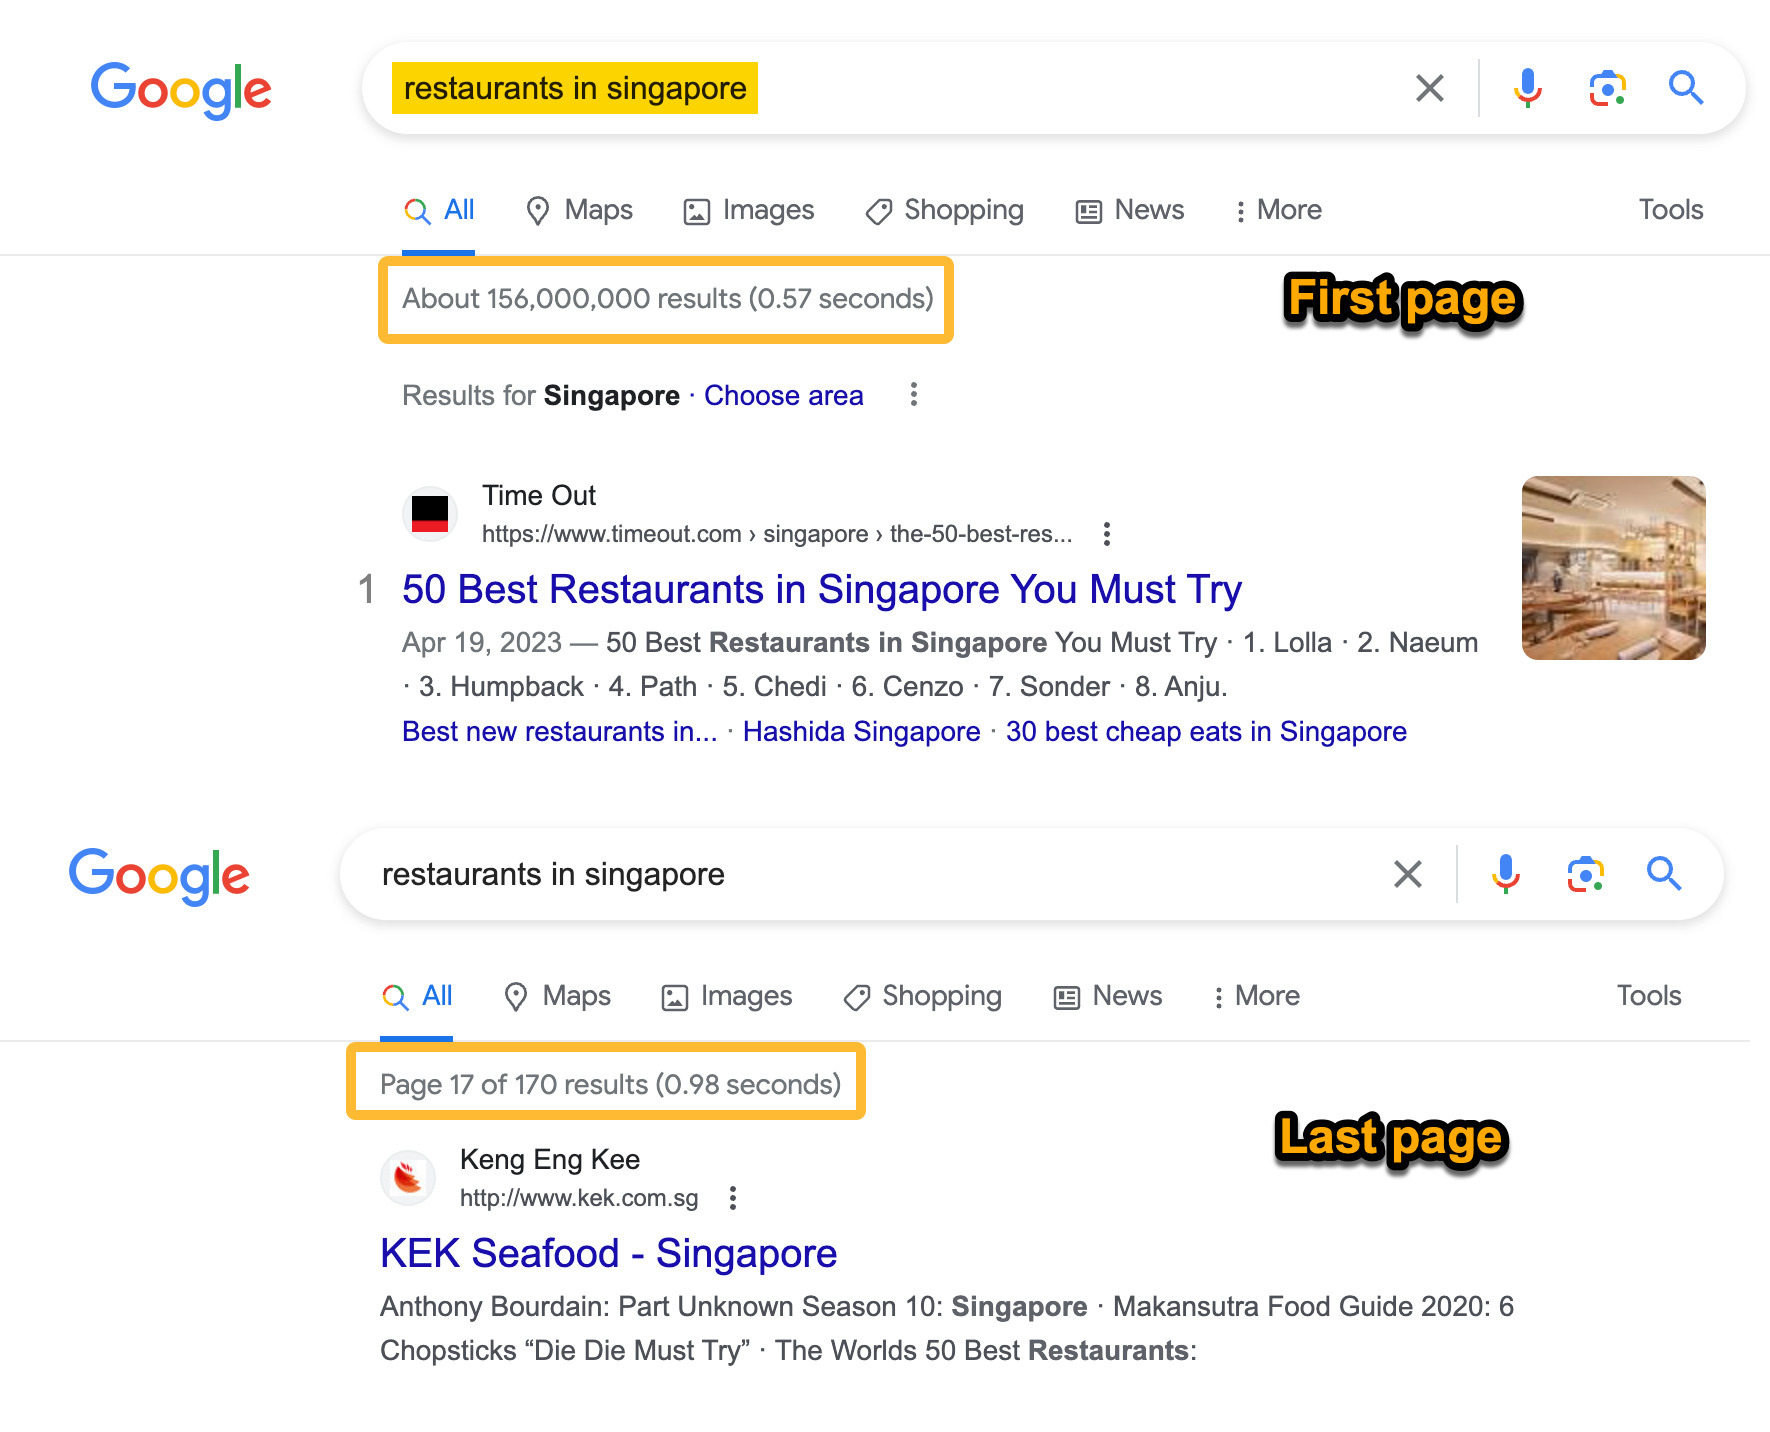 Number of searches for "restaurants in singapore" on Google's first vs. last page
